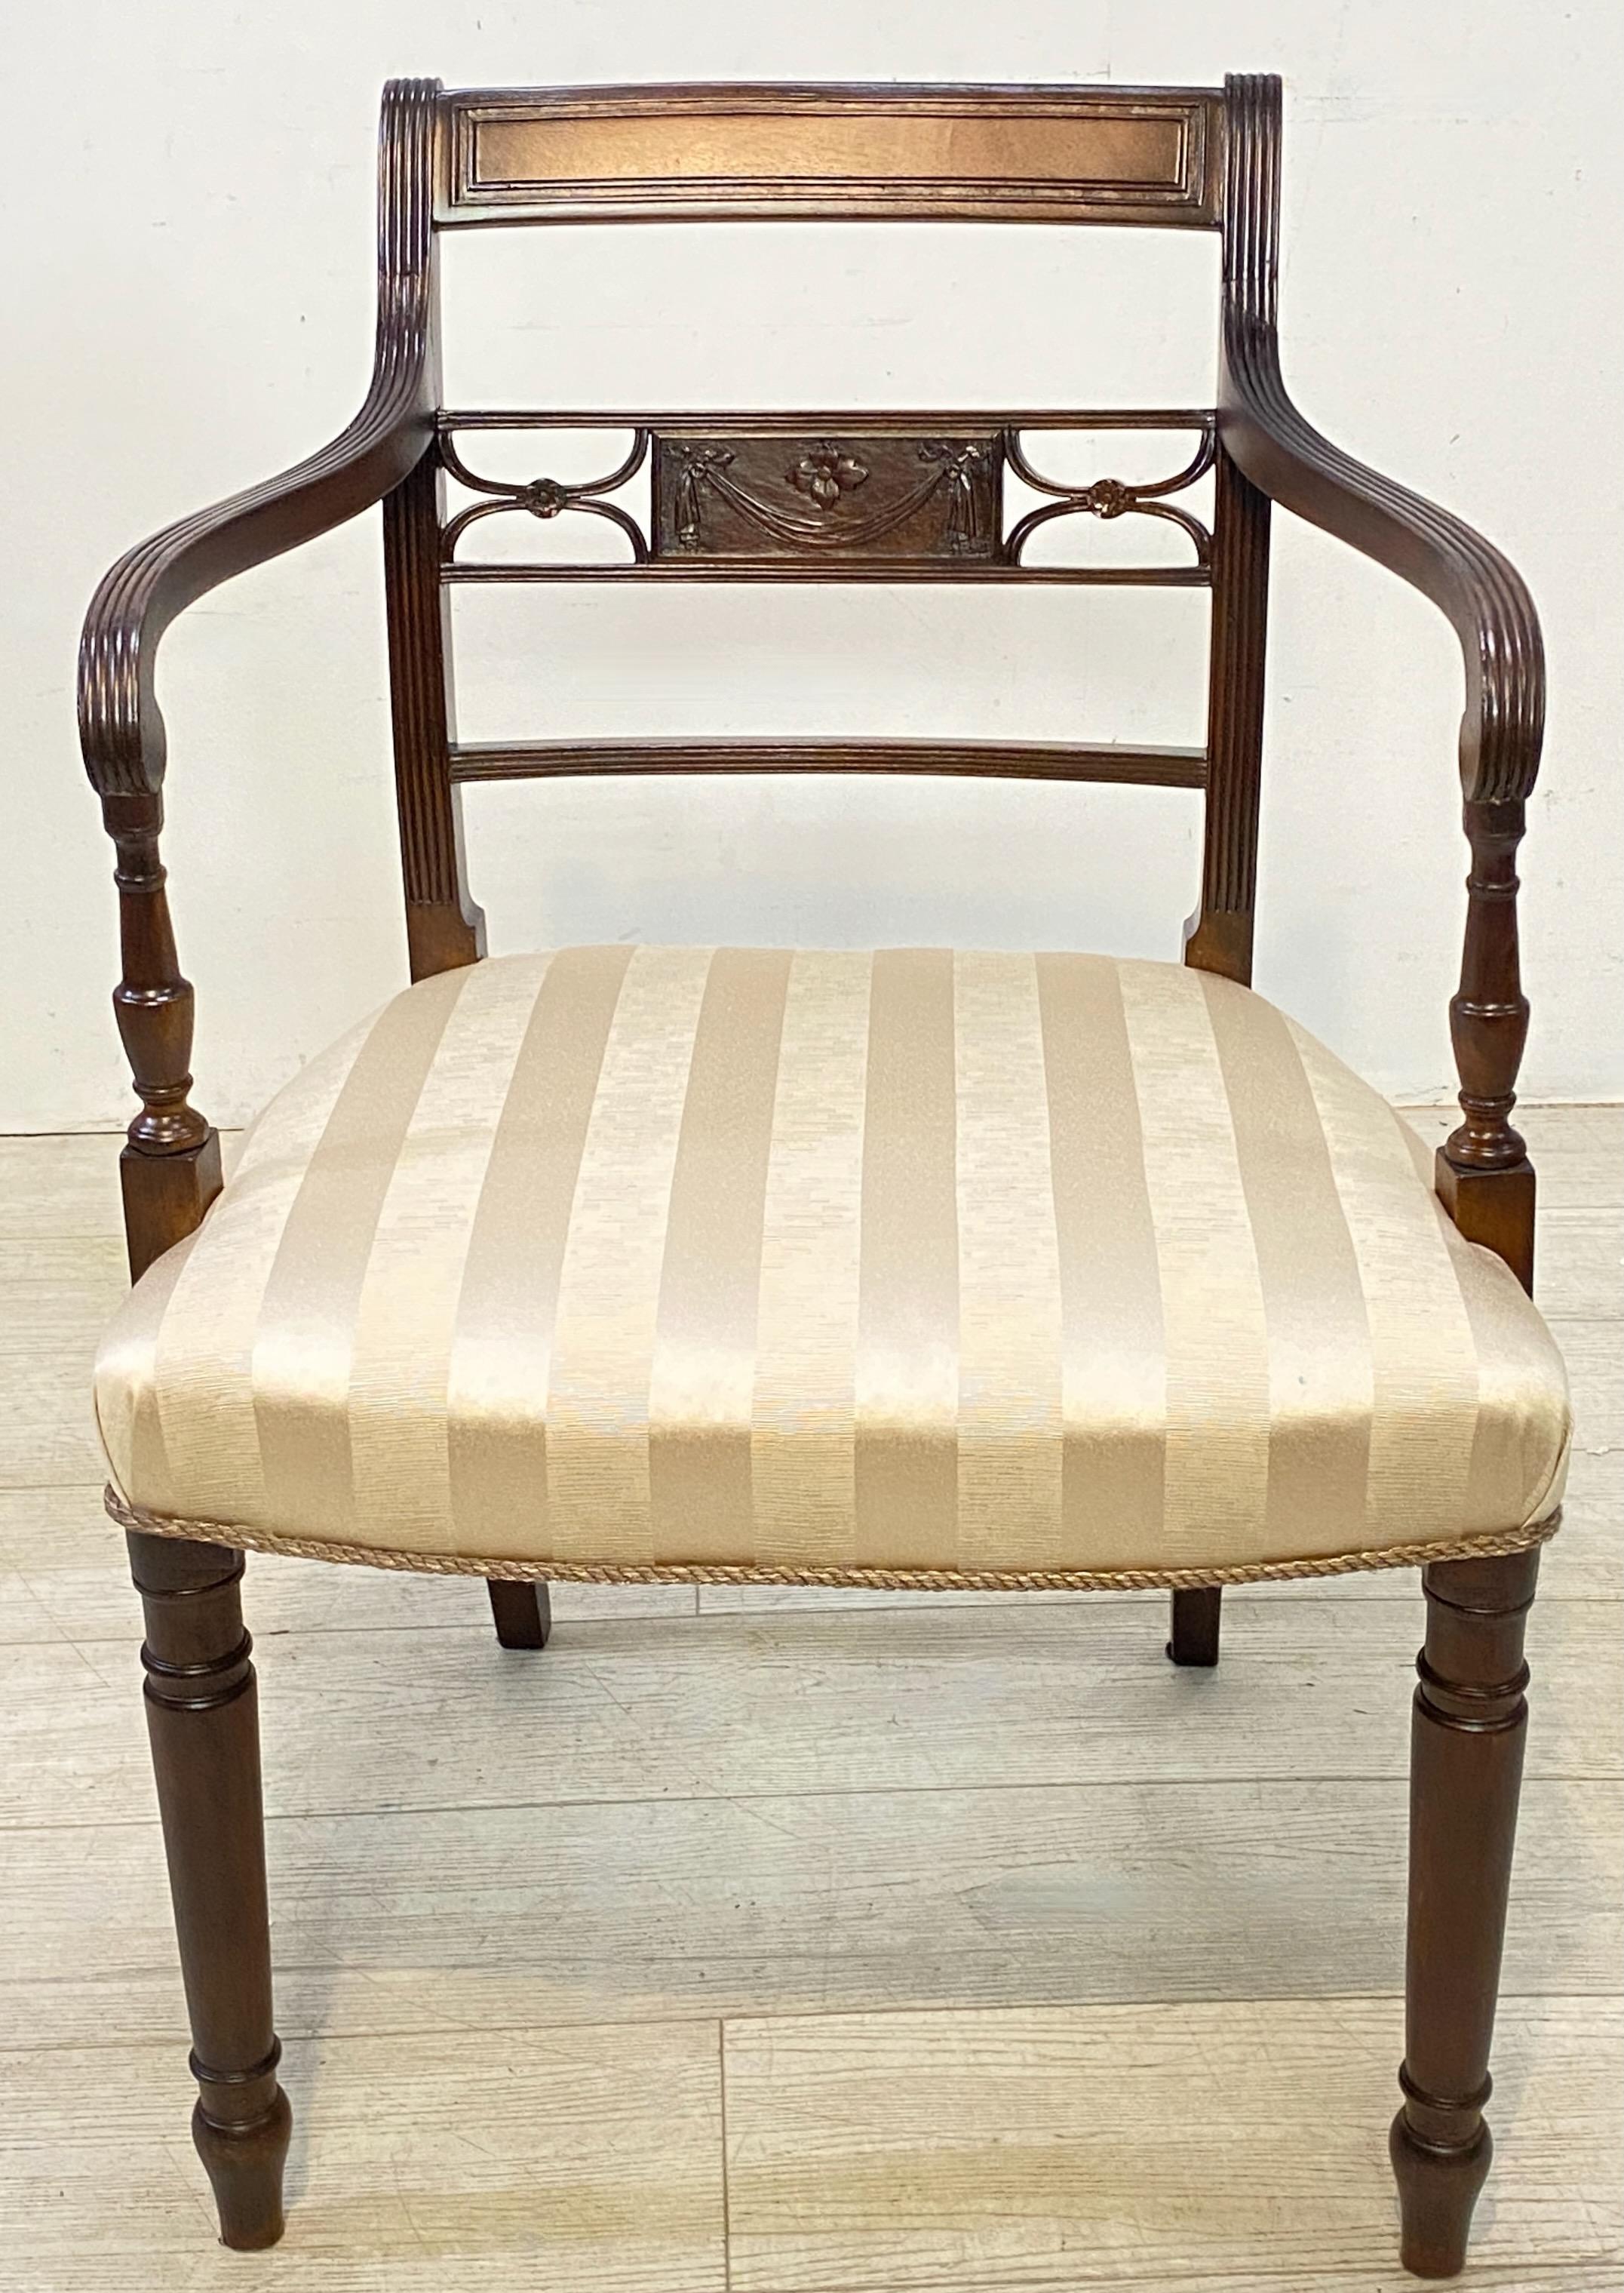 Set of 8 English George III Mahogany Dining Chairs, Early 19th Century For Sale 1